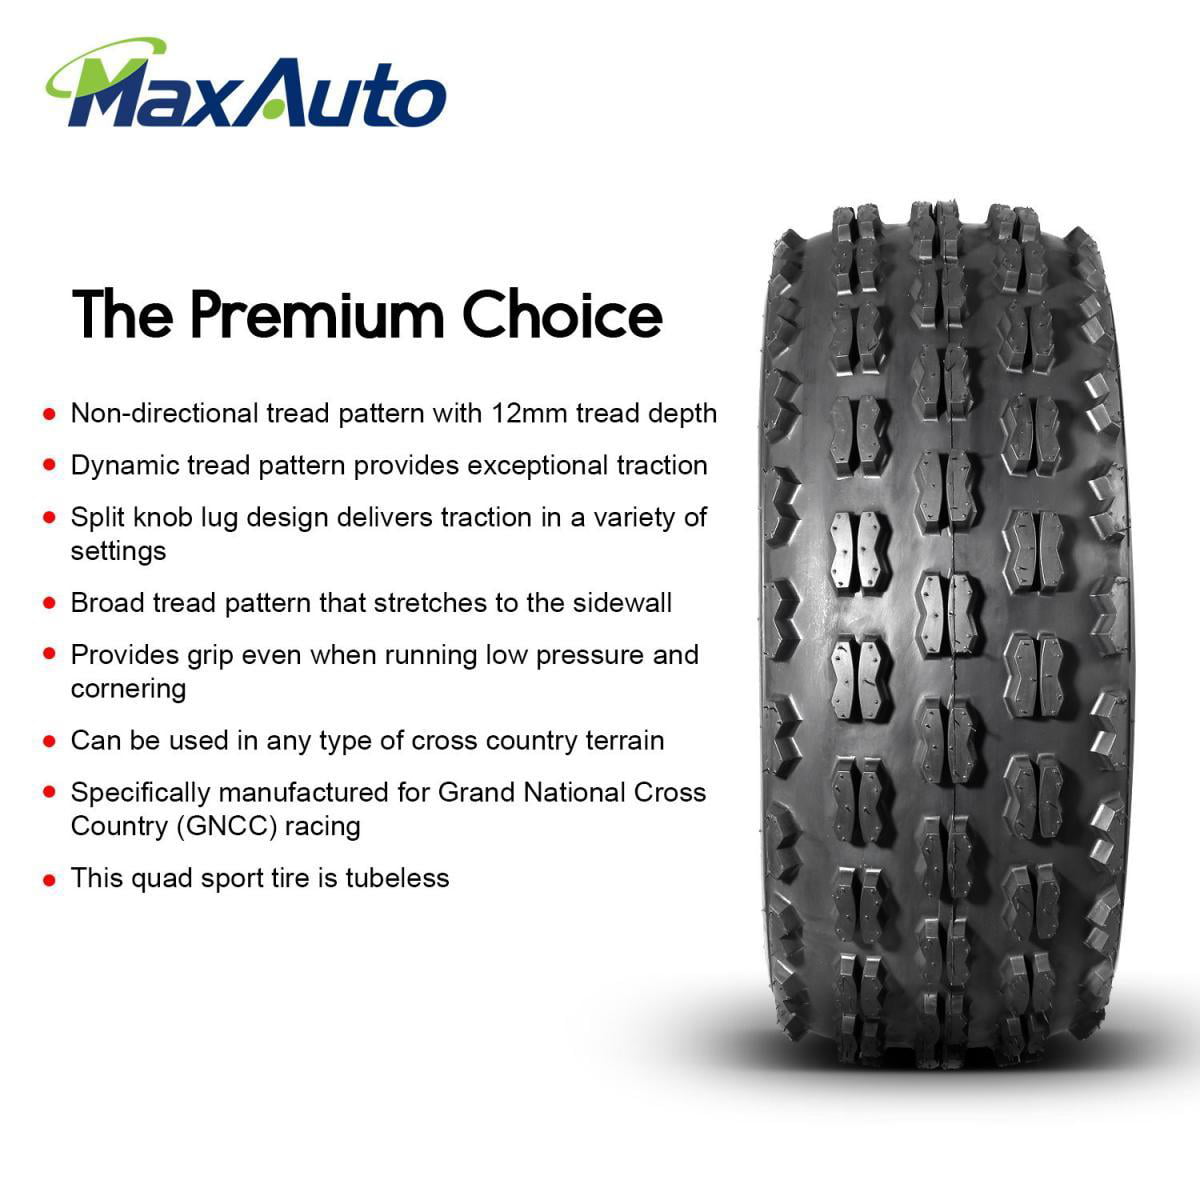 Set of 2 MaxAuto Sport Front ATV Tires 21X8-9 21x8x9 GNCC Cross Country Race,4 Ply Rating Tubeless 